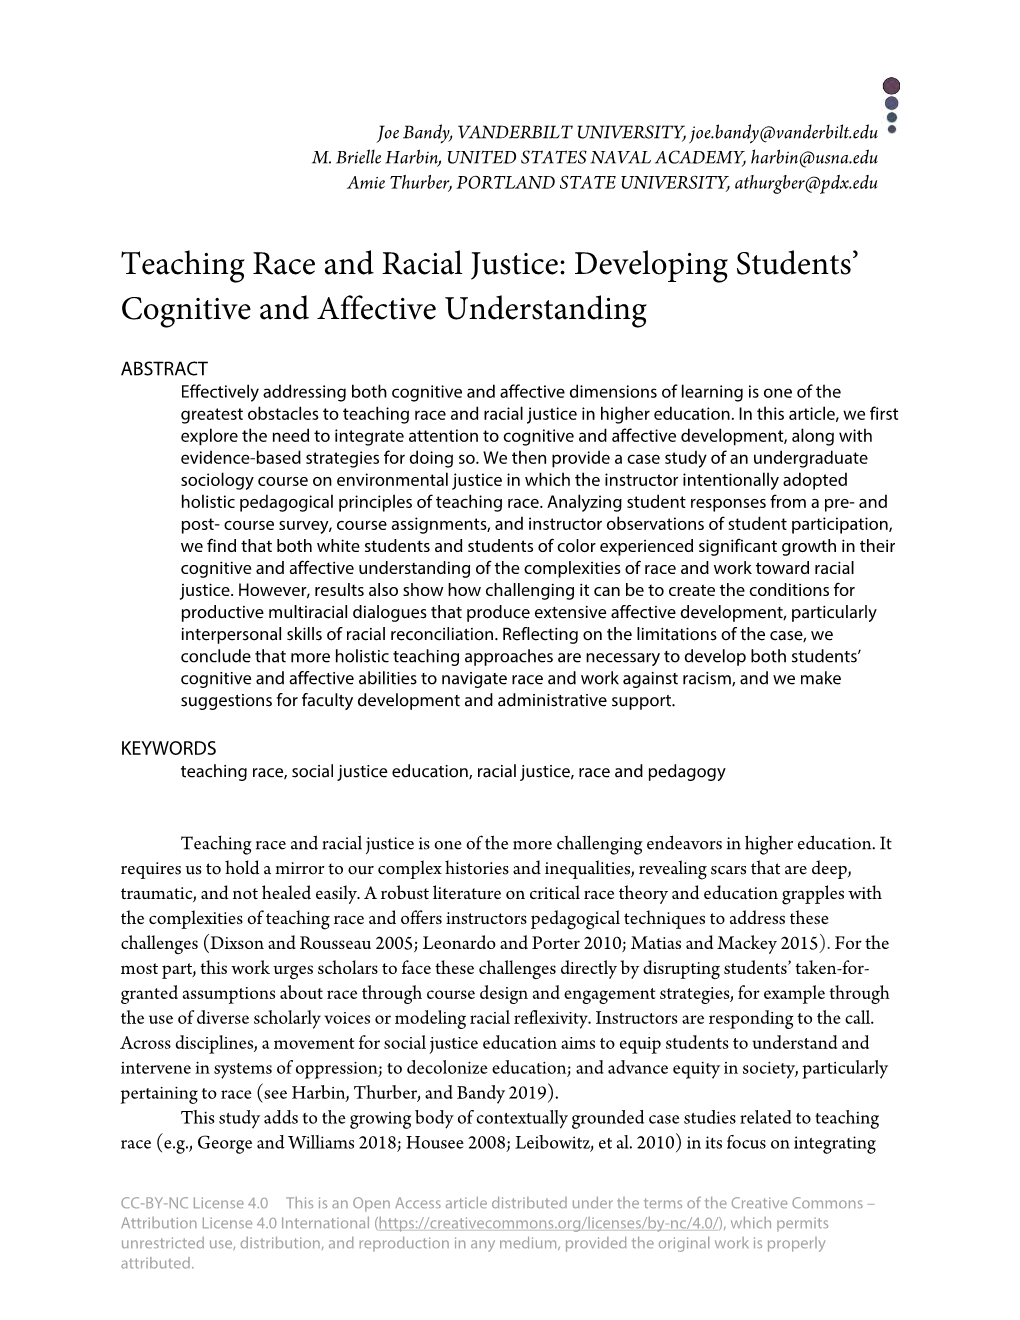 Teaching Race and Racial Justice: Developing Students’ Cognitive and Affective Understanding